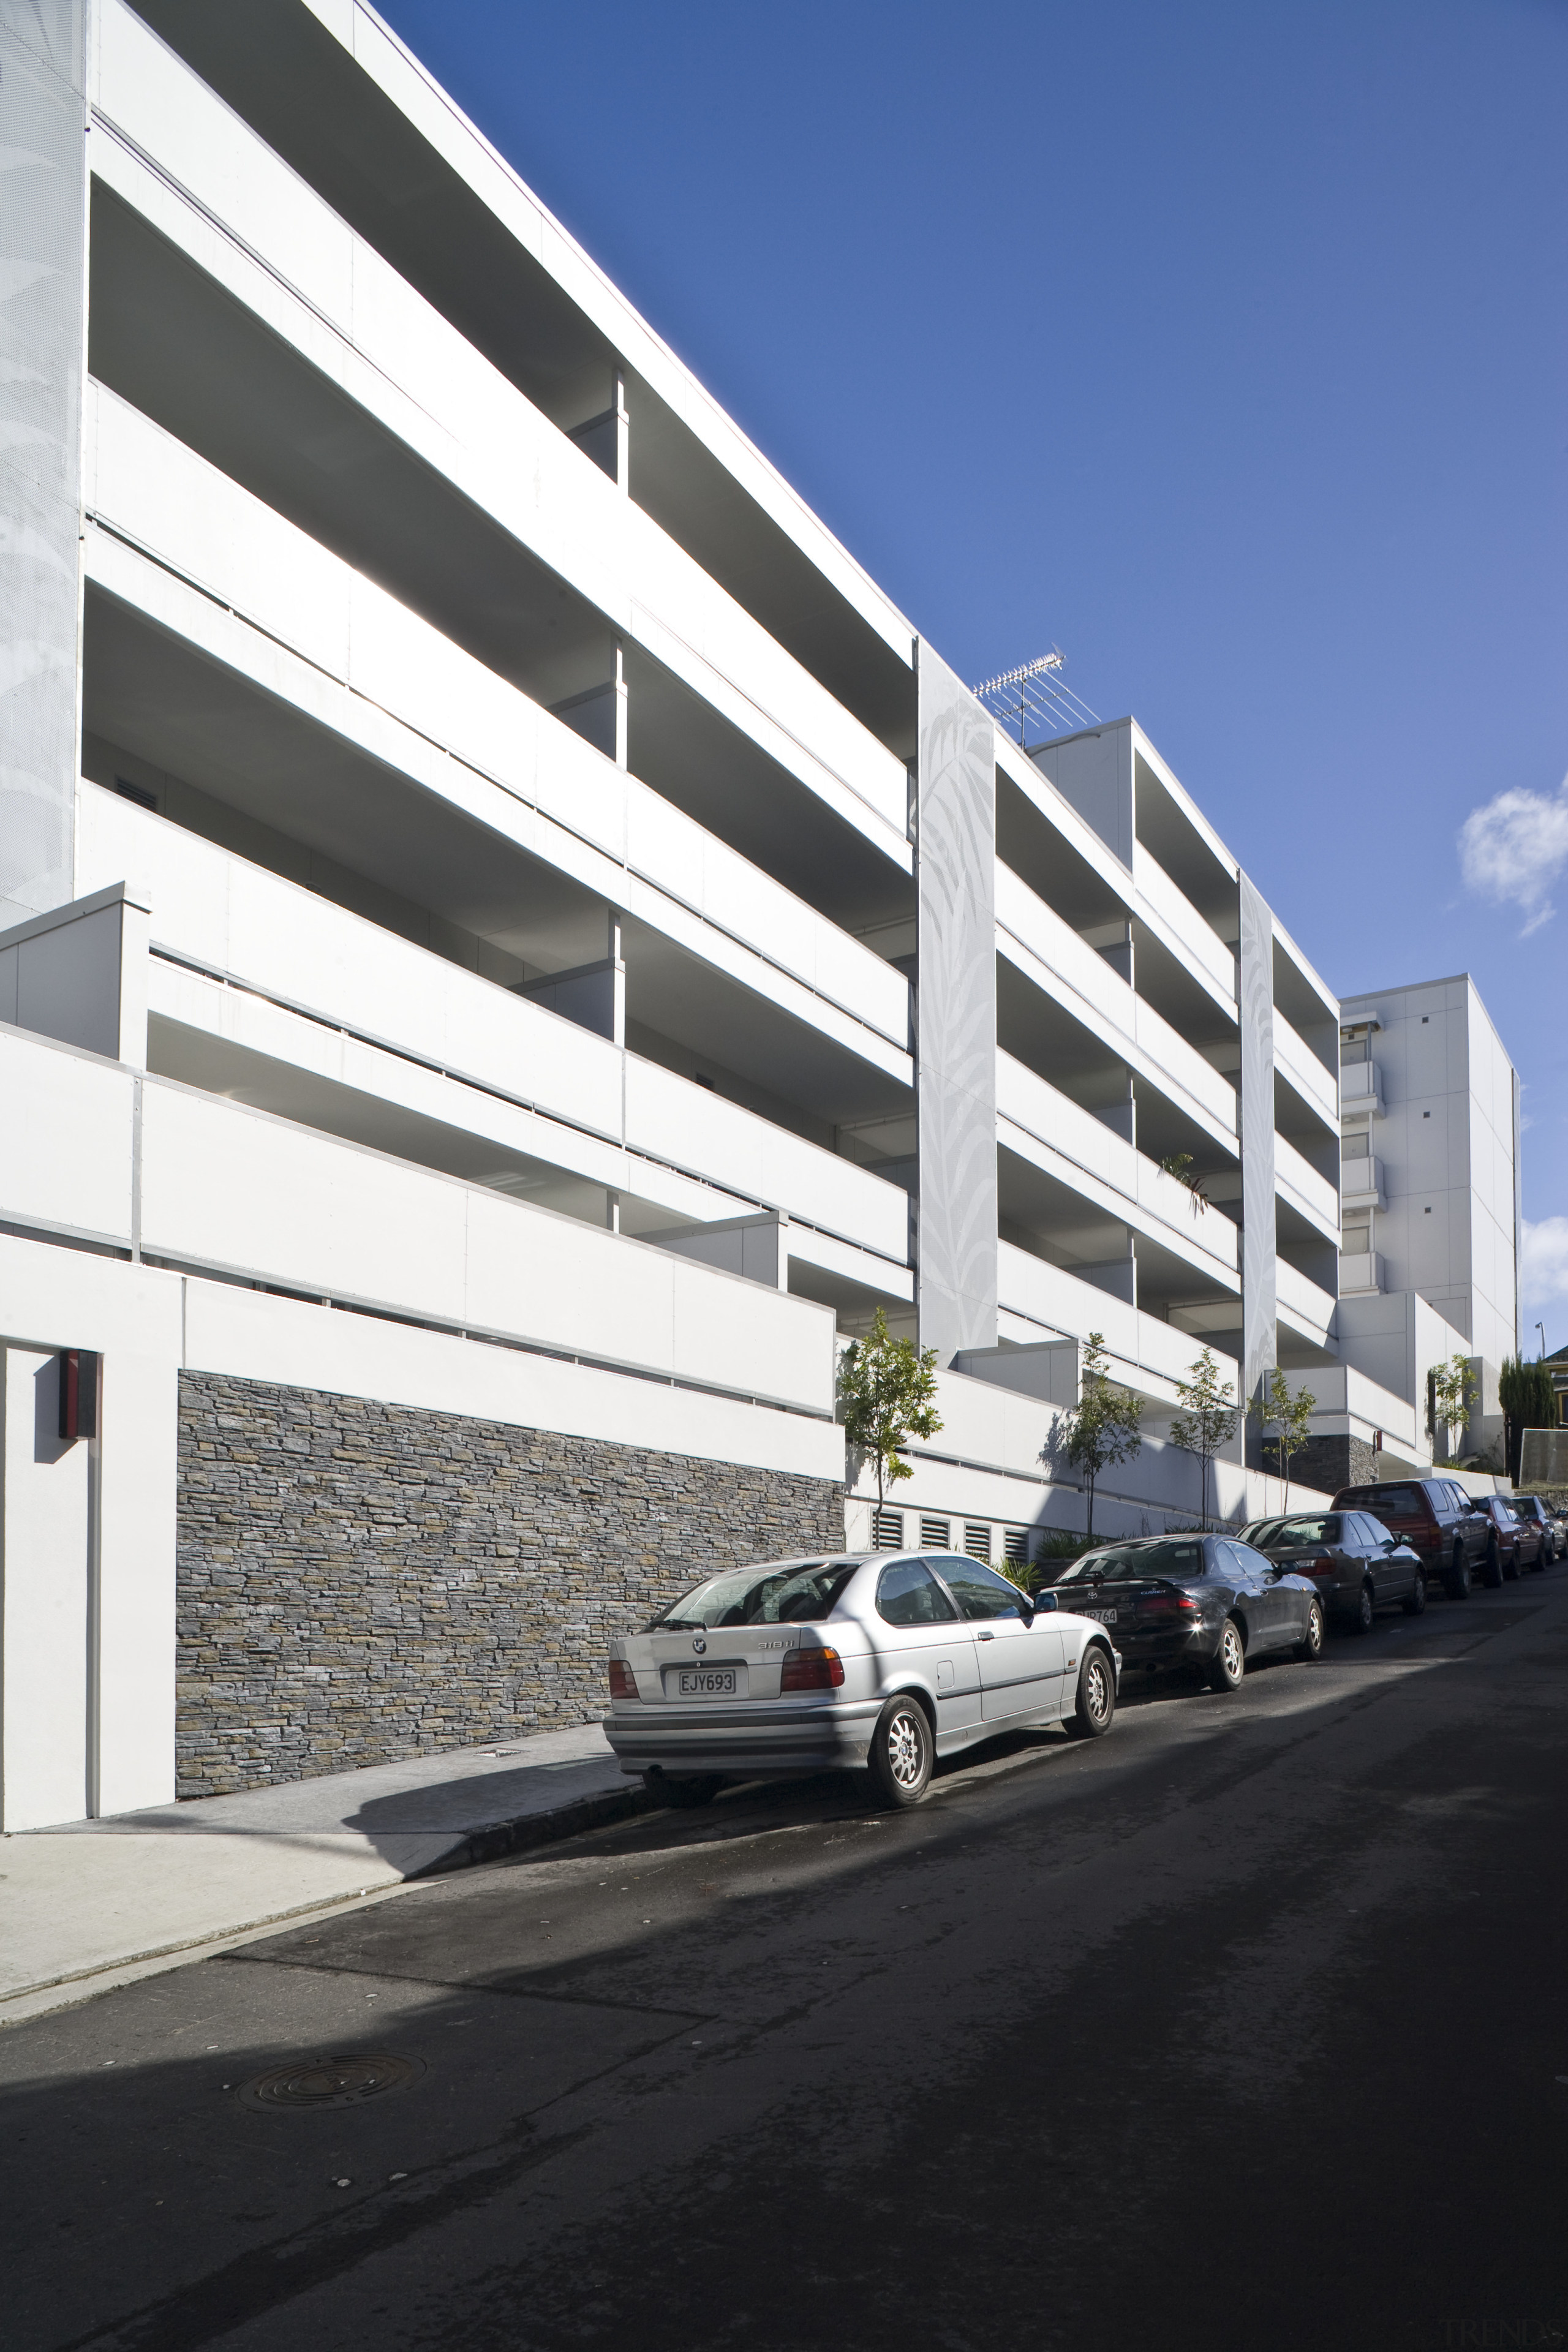 Exterior view of the Ivory apartments which features apartment, architecture, building, commercial building, condominium, corporate headquarters, facade, headquarters, house, metropolitan area, mixed use, motor vehicle, parking, parking lot, property, residential area, sky, black, white